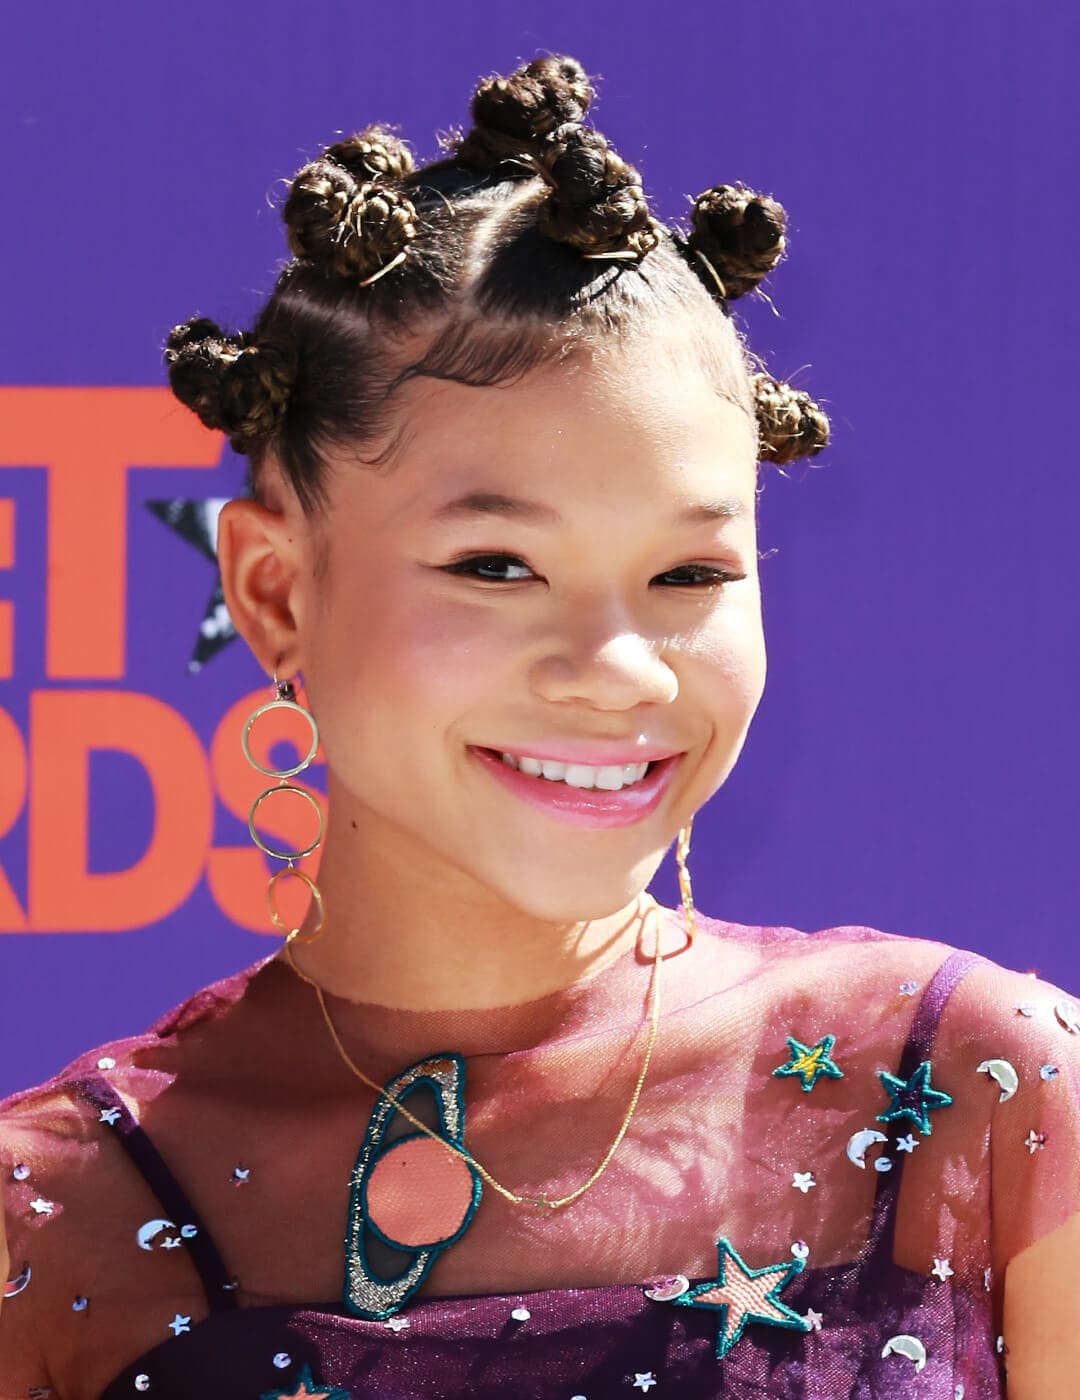 Close-up of a smiling Storm Reid looking cute in a outer space themed dress and bantu knots hairstyle